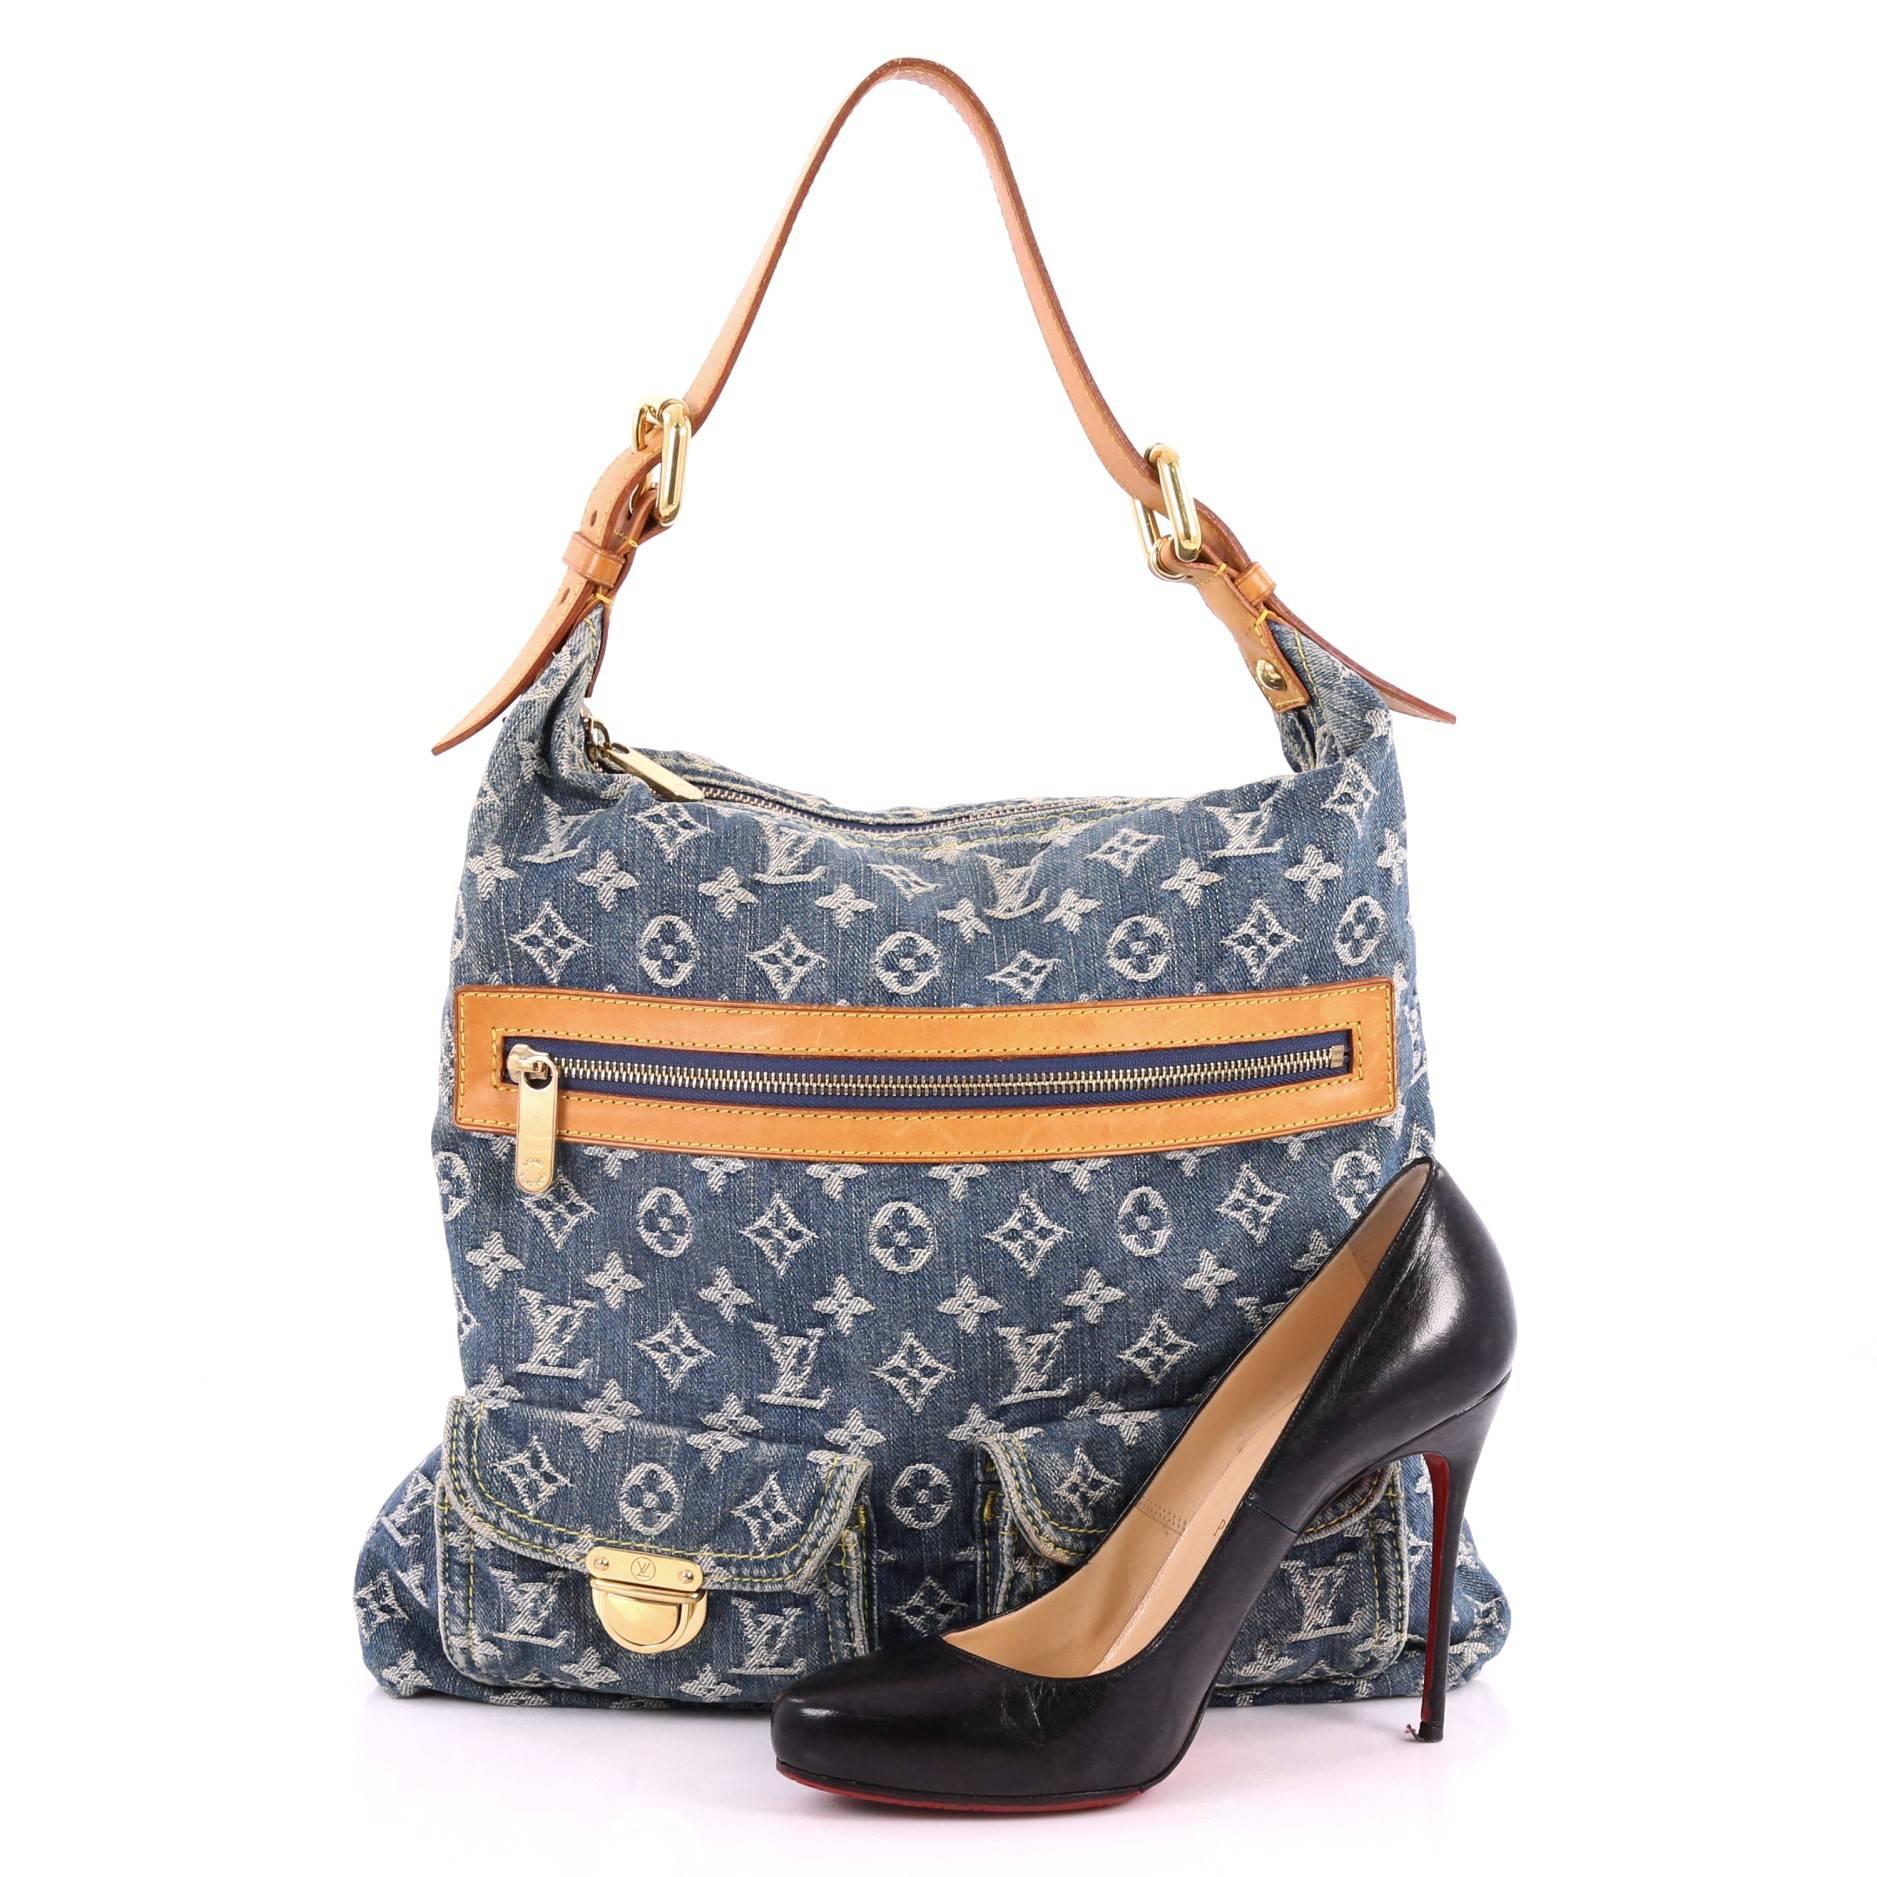 This authentic Louis Vuitton Baggy Handbag Denim GM is a fresh twist on an iconic design that will stylishly complement a casual look. Crafted from blue monogram denim, this hobo features vachetta leather trims with yellow contrast stitching, two